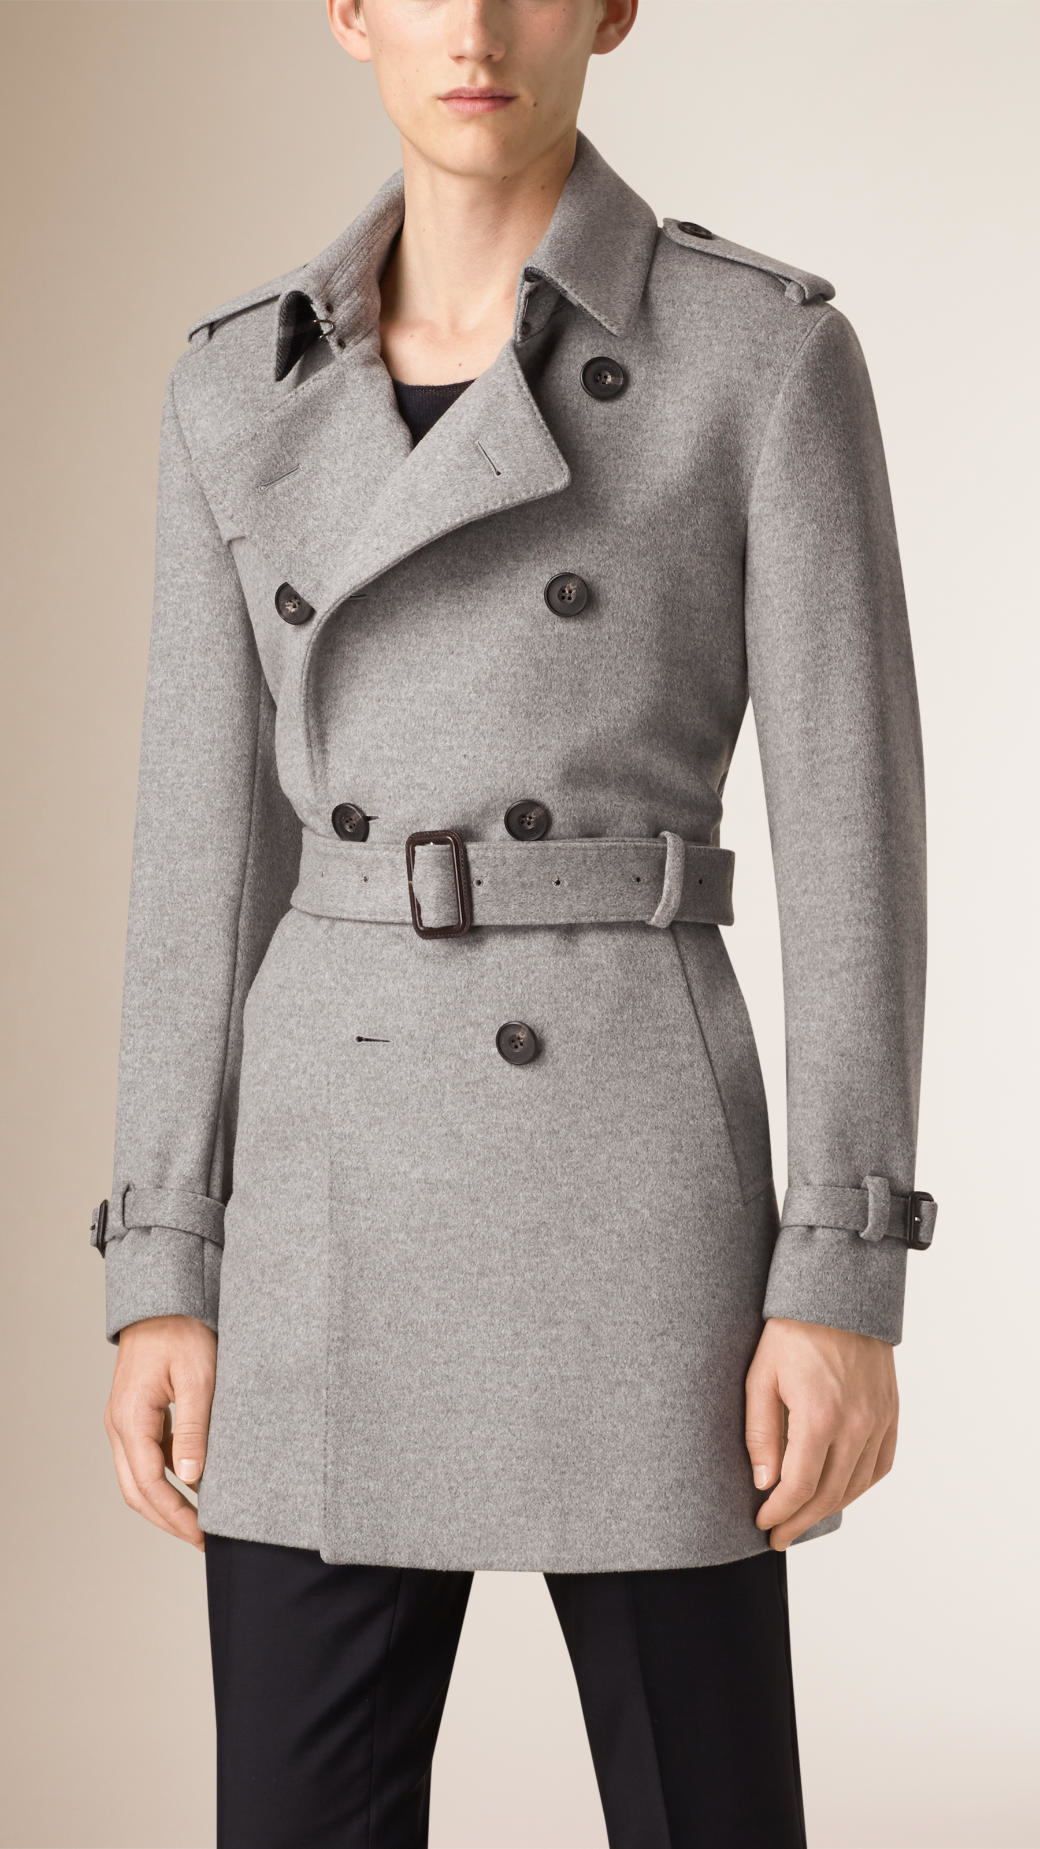 Lyst - Burberry Mid-length Wool Cashmere Trench Coat in Gray for Men